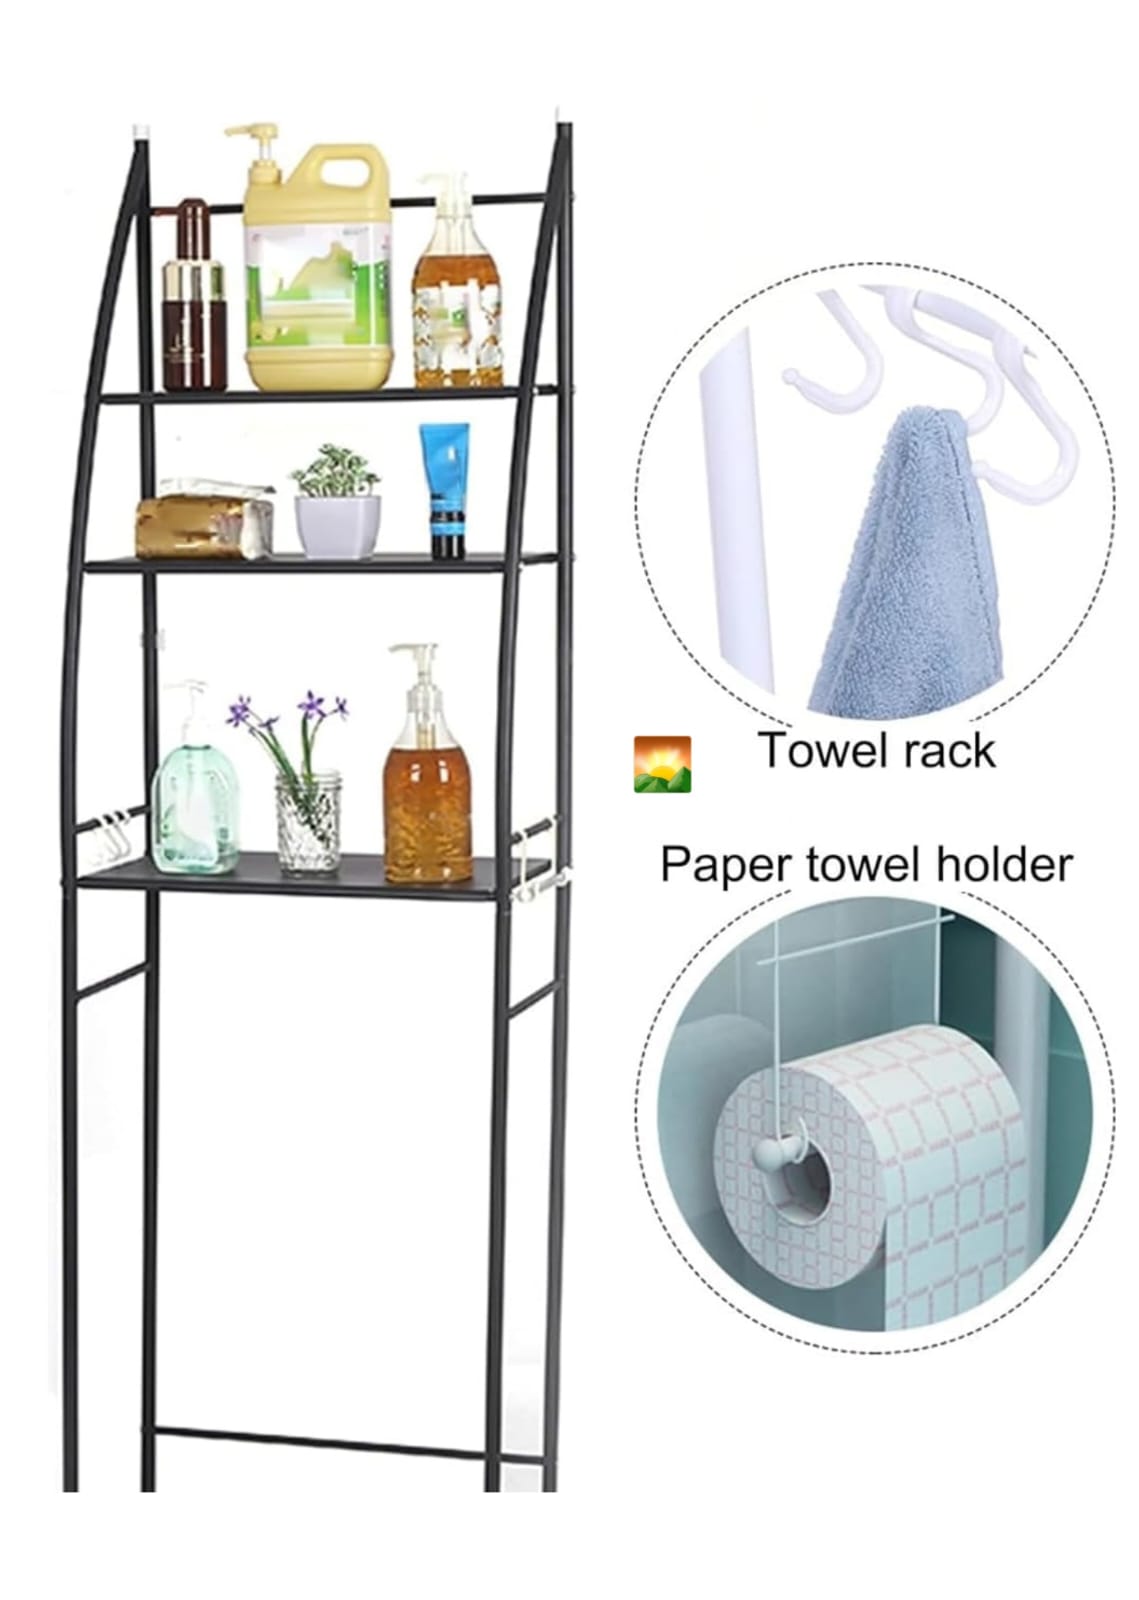 Transform your bathroom with our best-selling stand organizer! Declutter and organize effortlessly with sleek design and ample storage. Perfect for maximizing space while enhancing style.